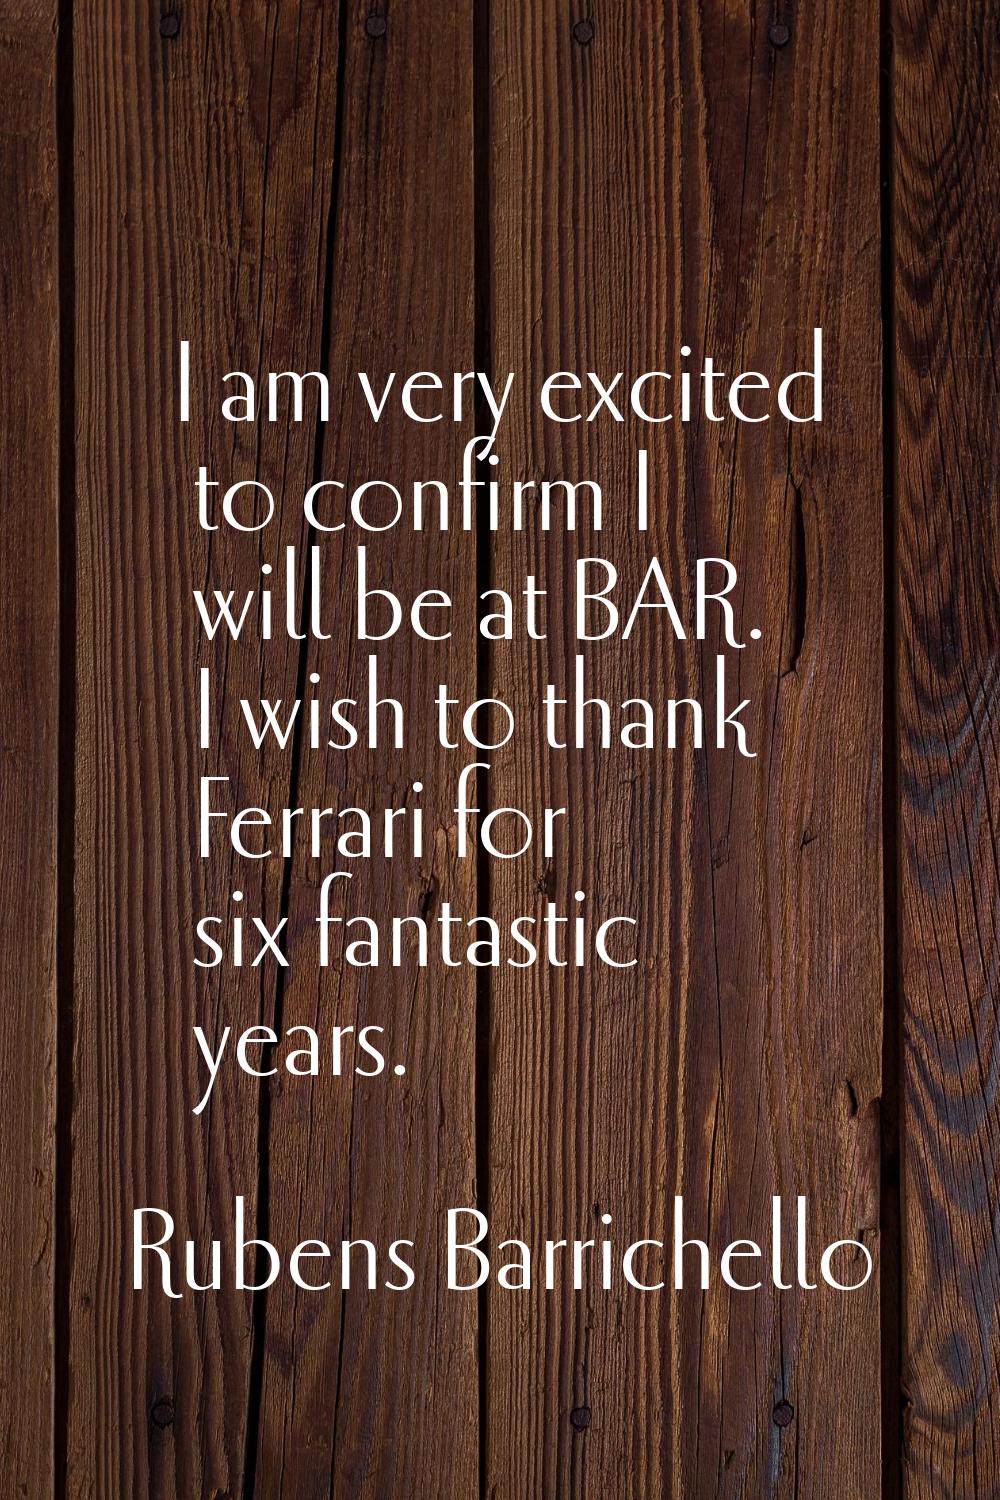 I am very excited to confirm I will be at BAR. I wish to thank Ferrari for six fantastic years.